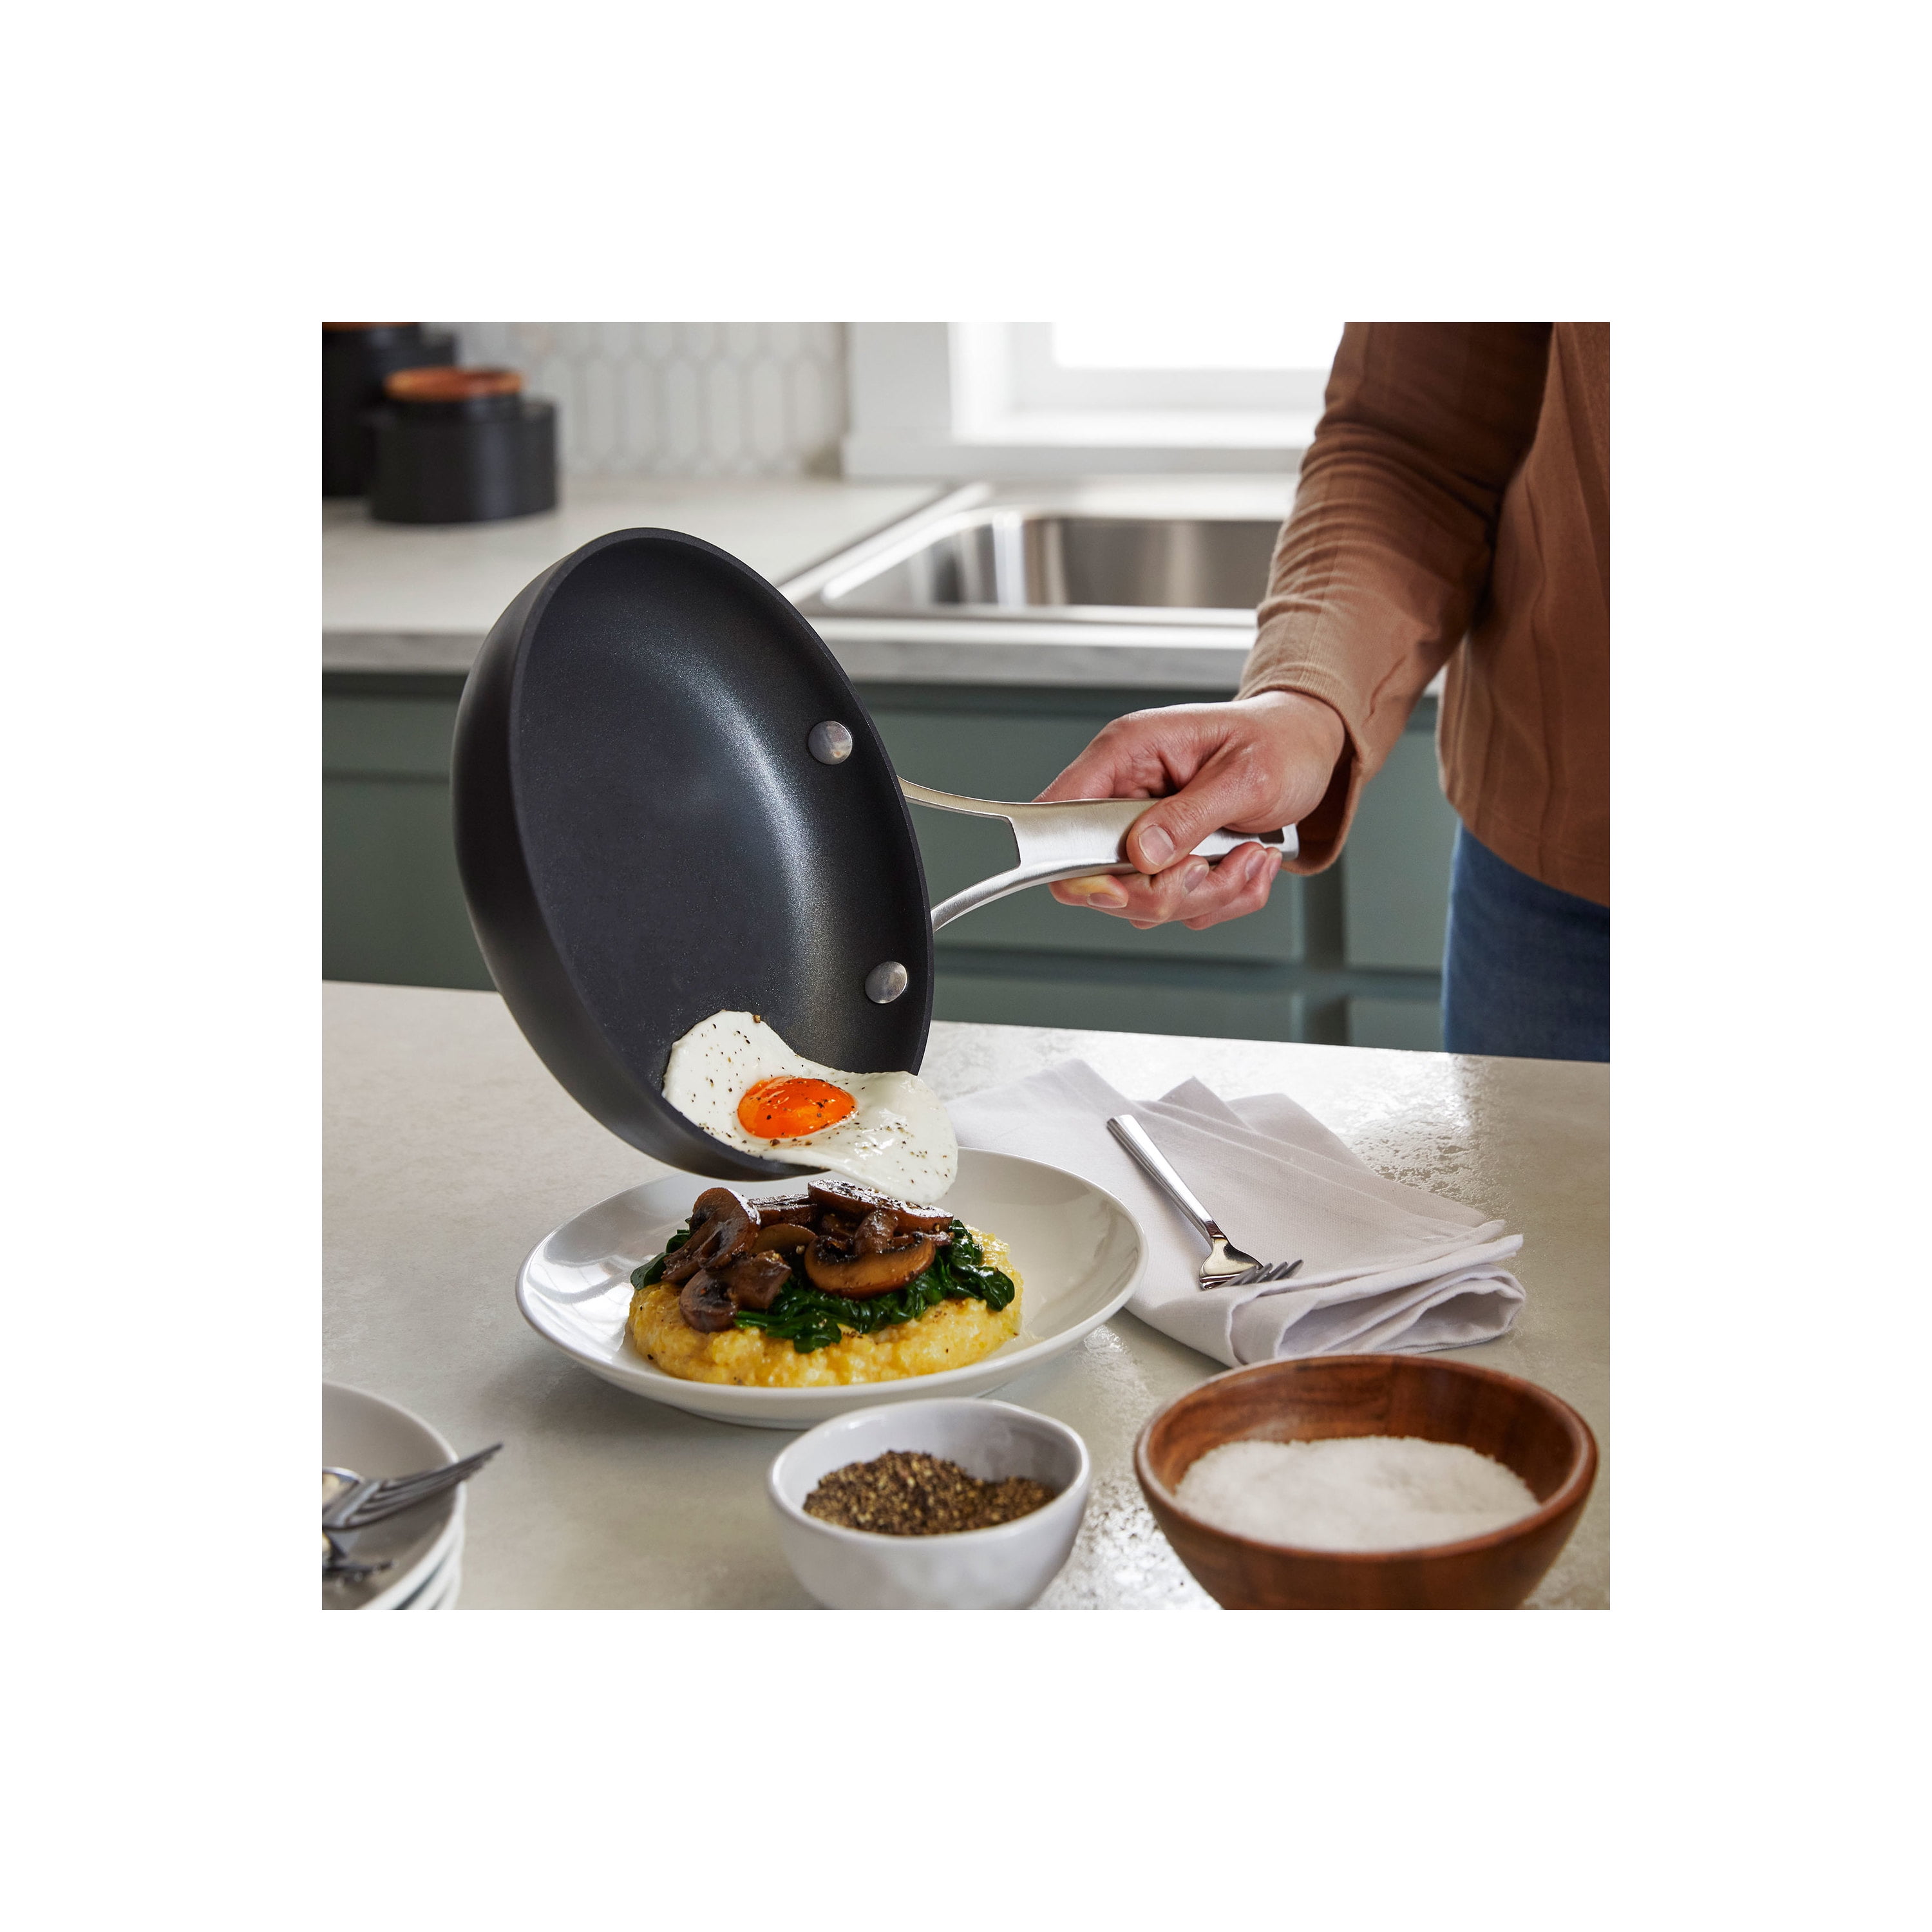 Calphalon Premier With Mineralshield Nonstick 10 Fry Pan : Target